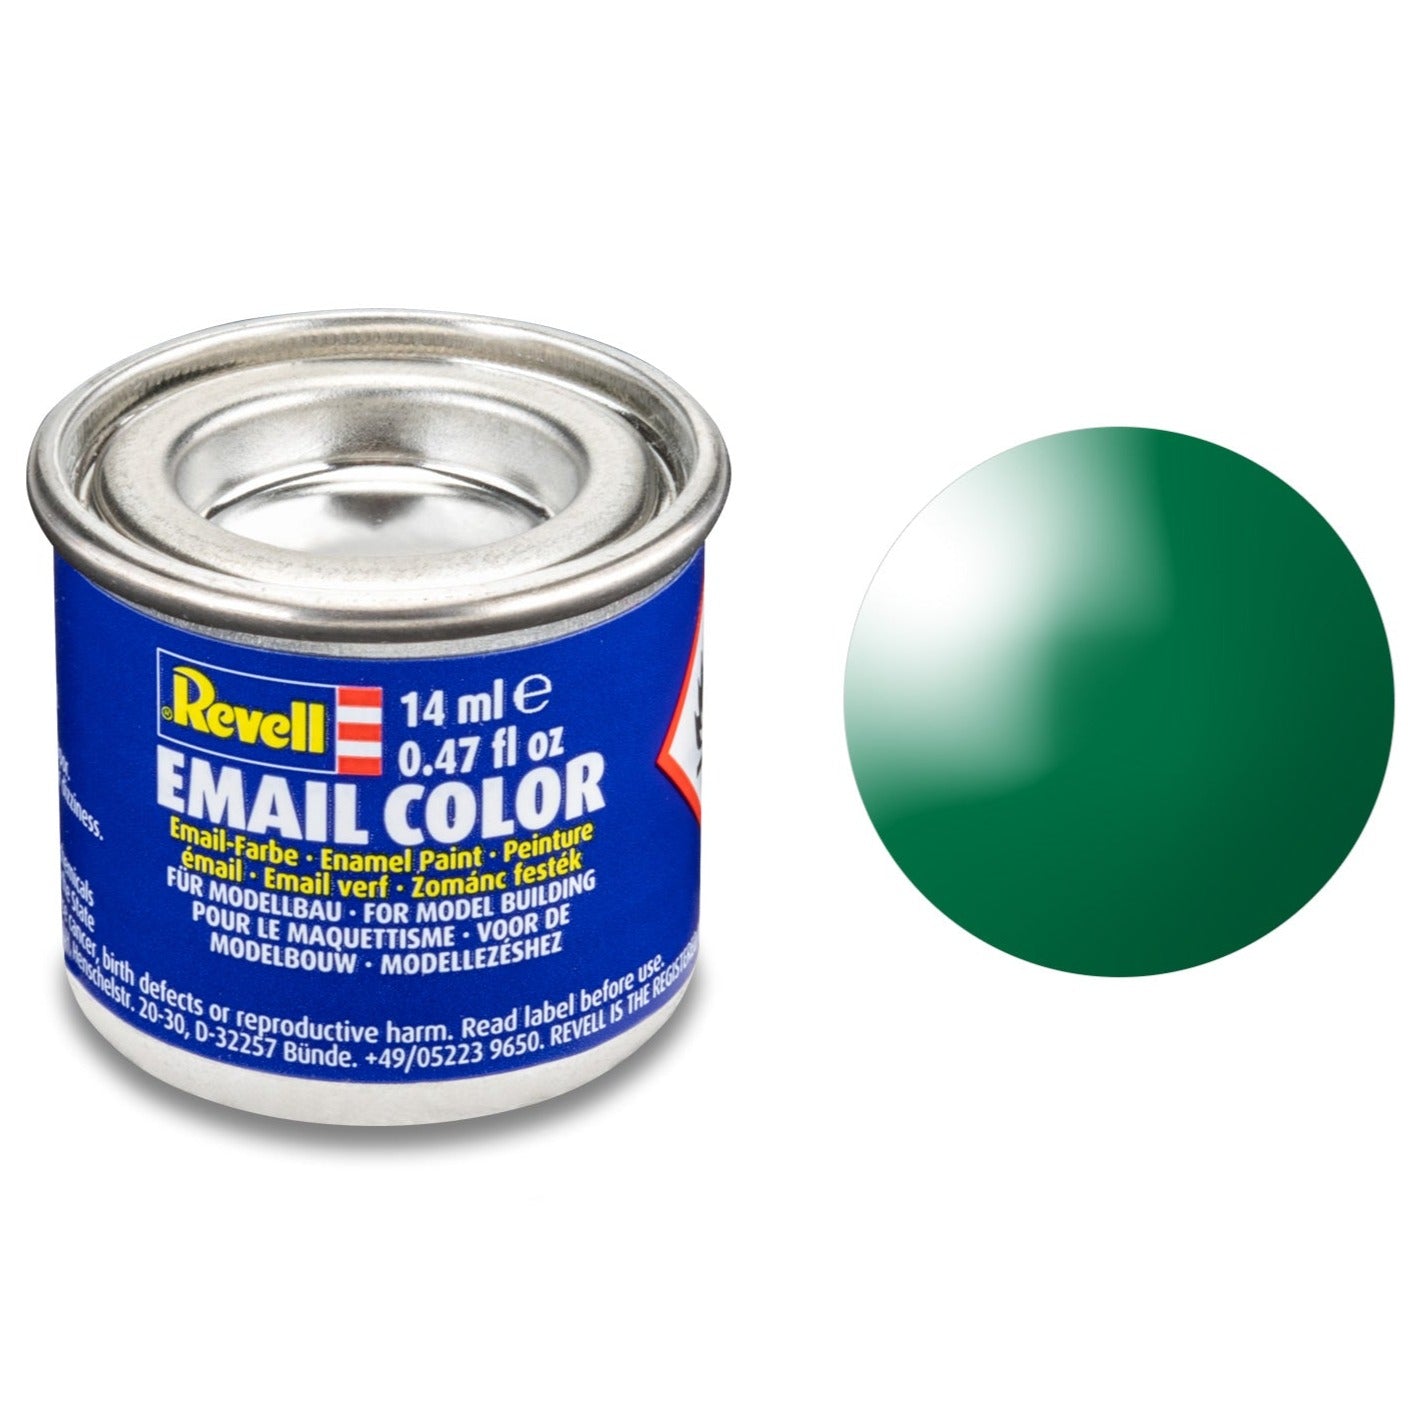 Revell Gloss "Emerald Green" (RAL 6029) Enamel Paint - 14ml - 32161 - Loaded Dice Barry Vale of Glamorgan CF64 3HD